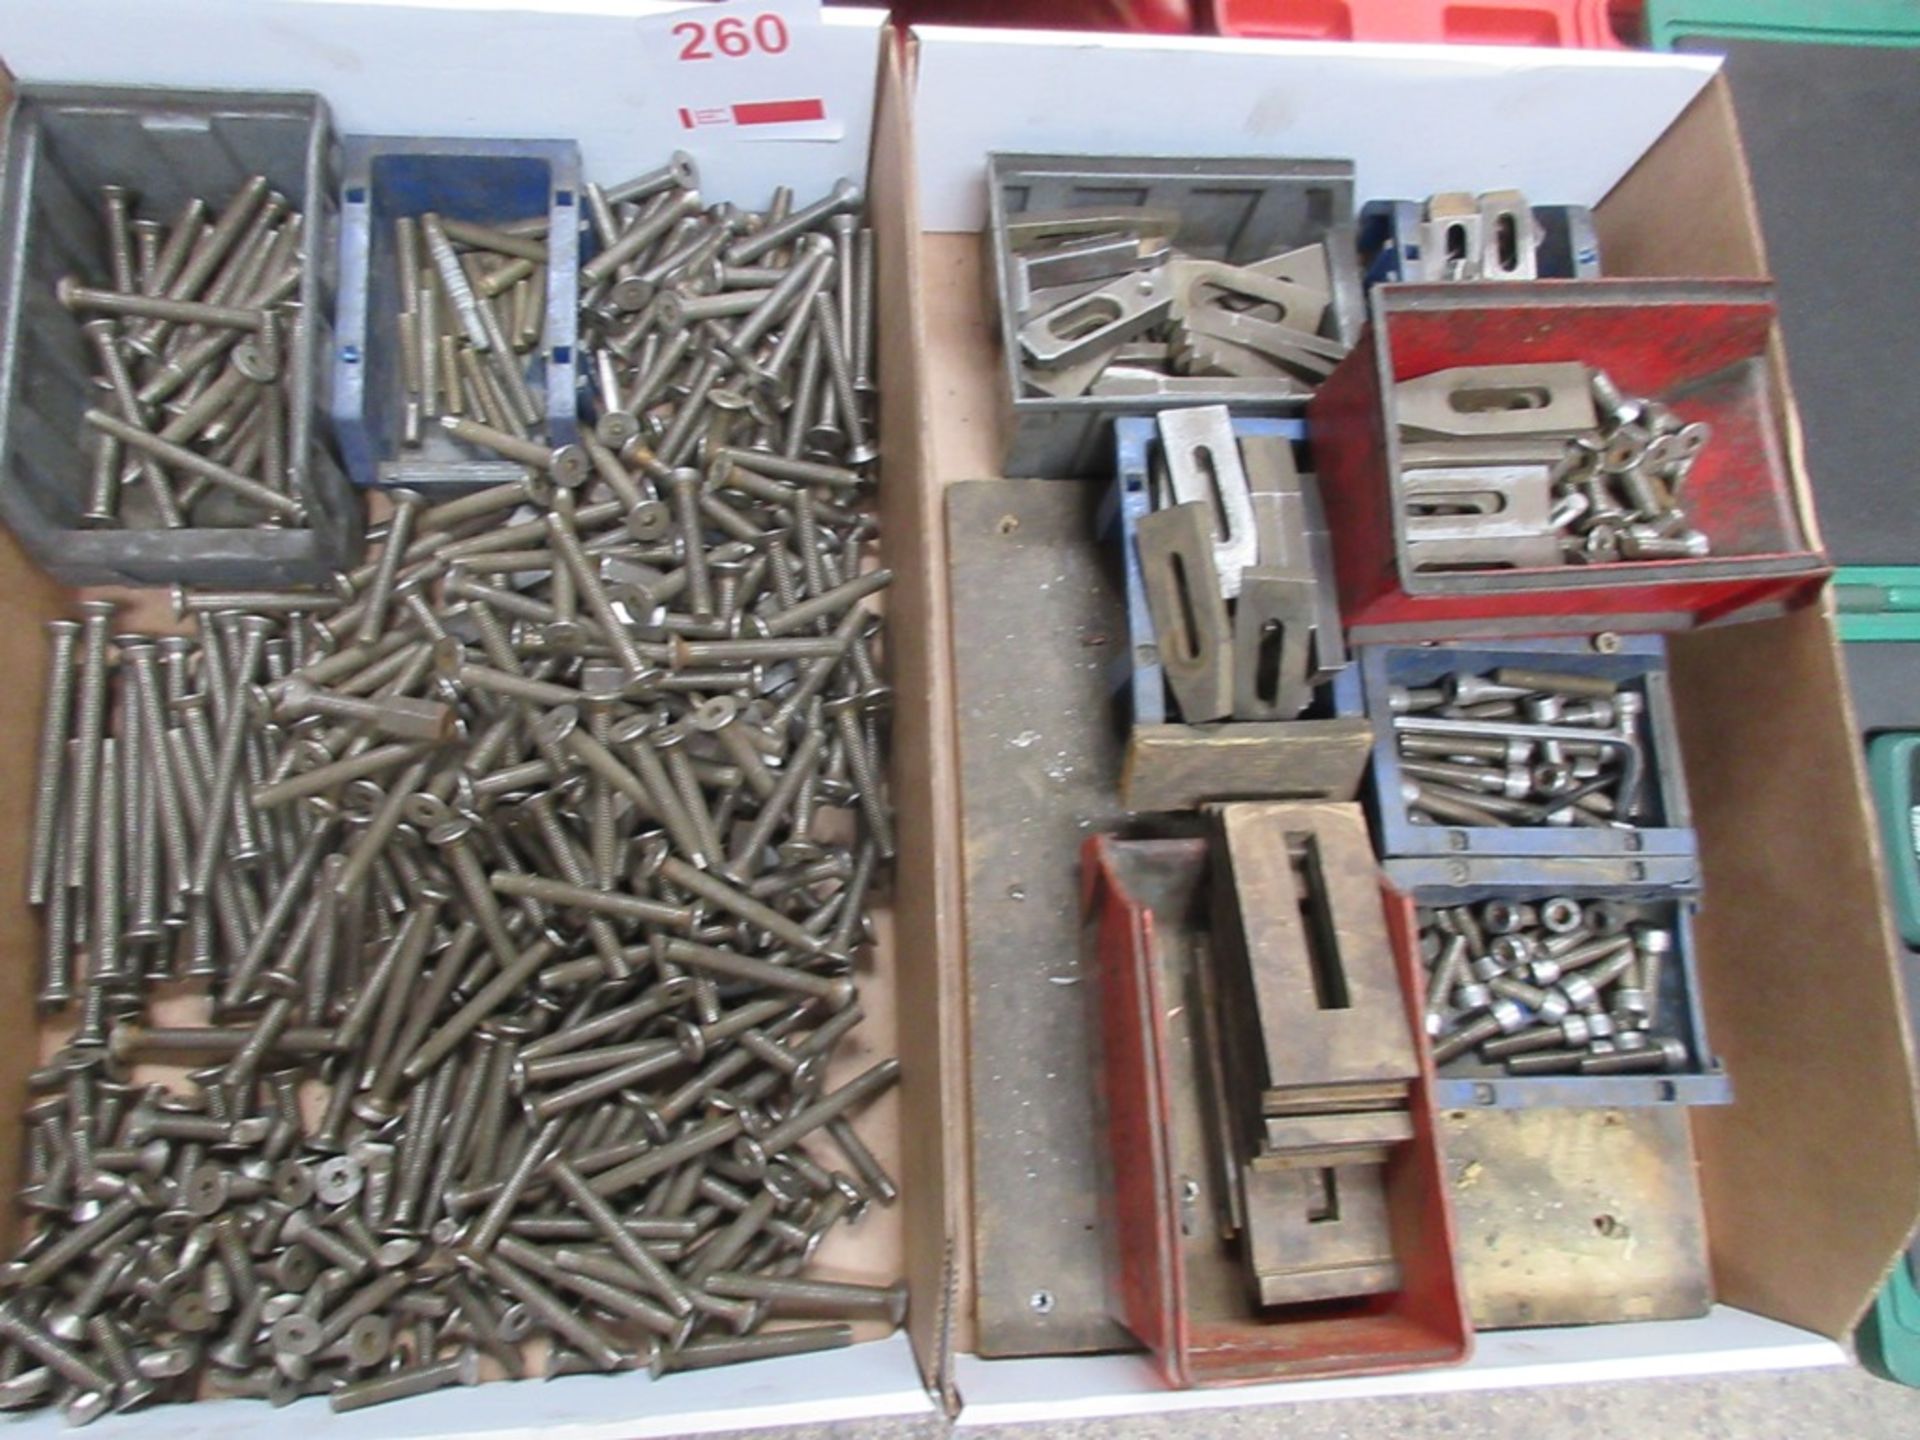 Quantity of various clamps, bolts, etc.